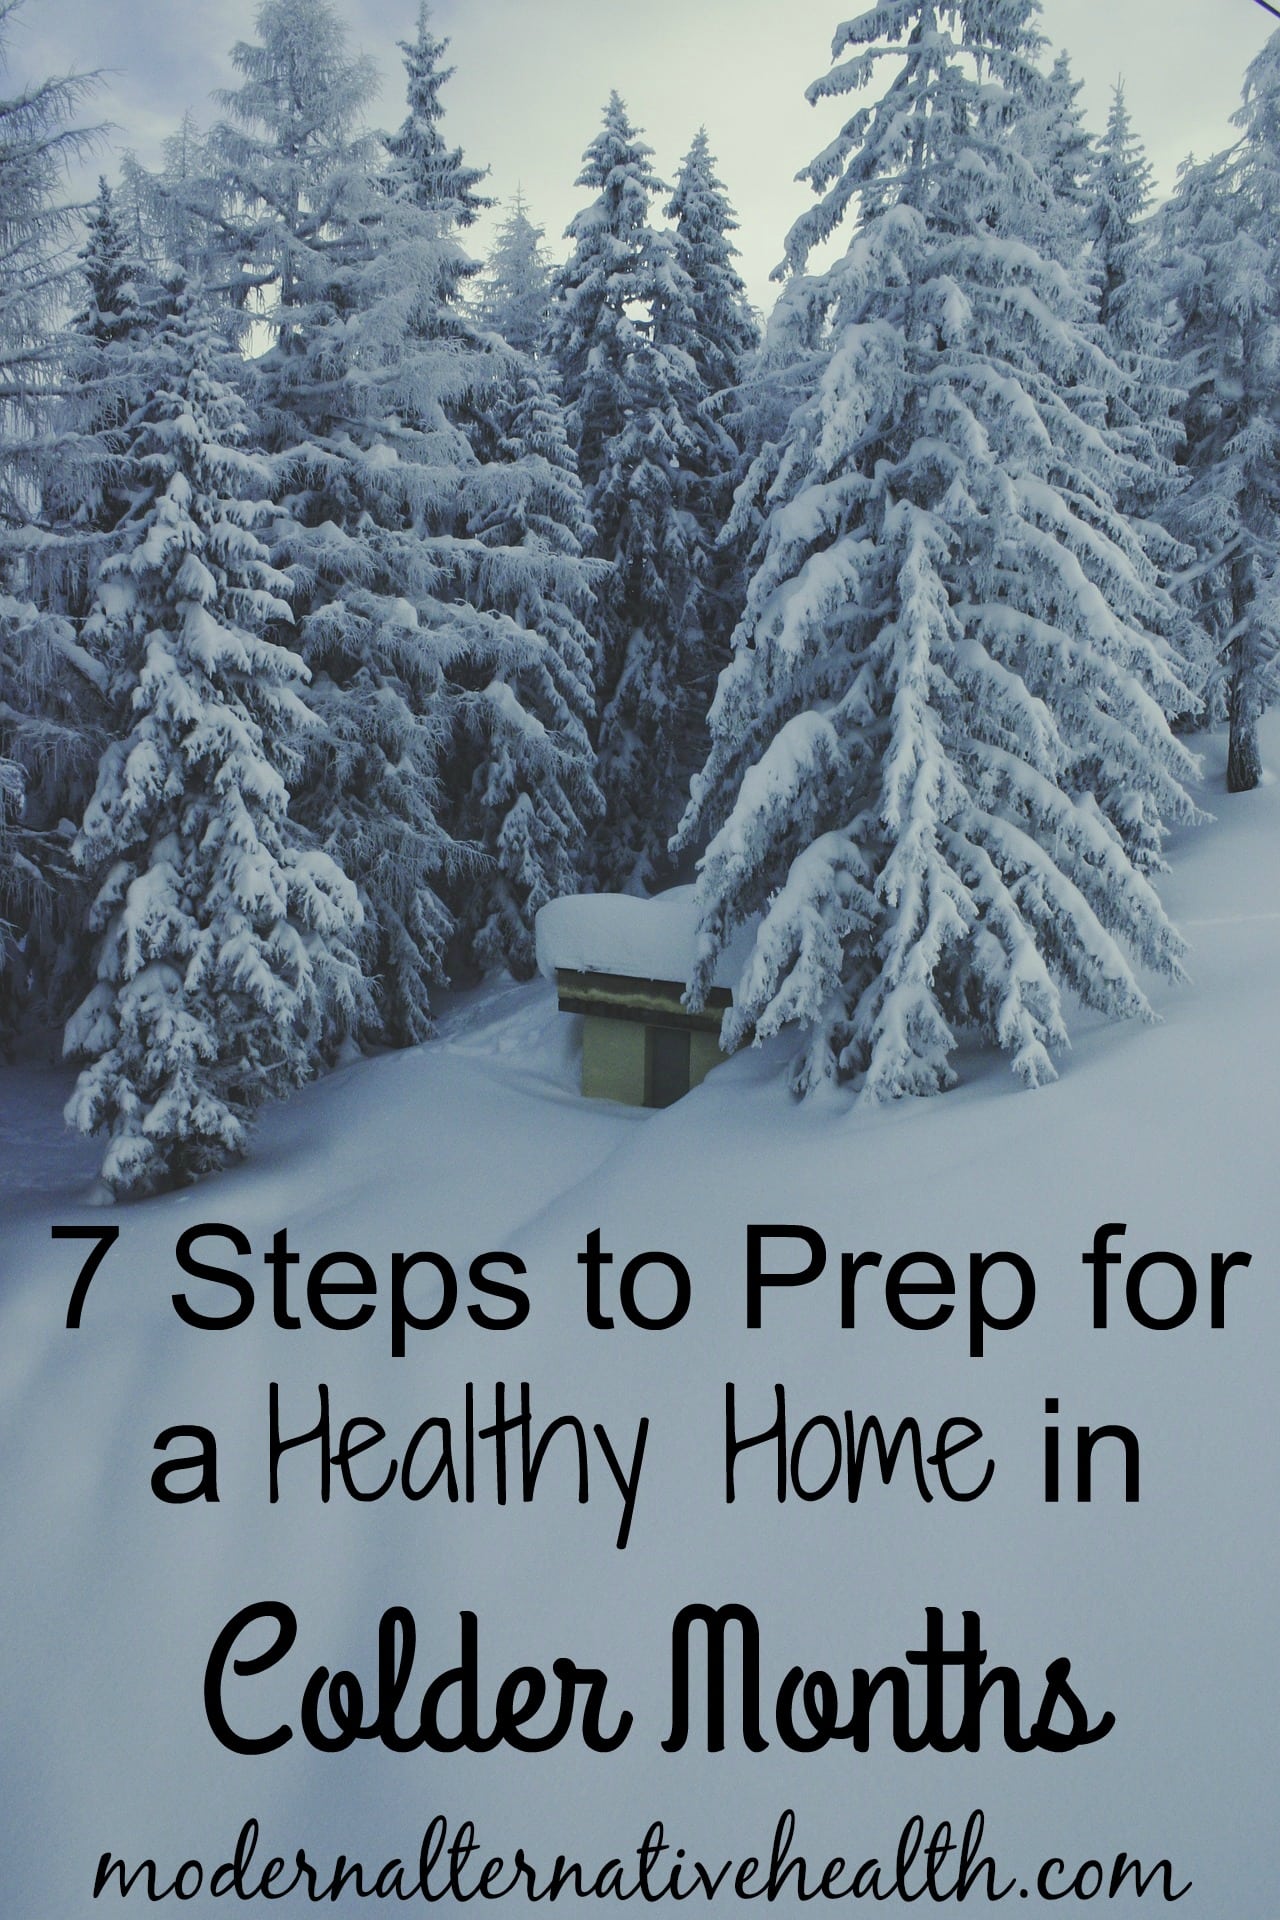 7 Steps to Prep for a Healthy Home in Colder Months